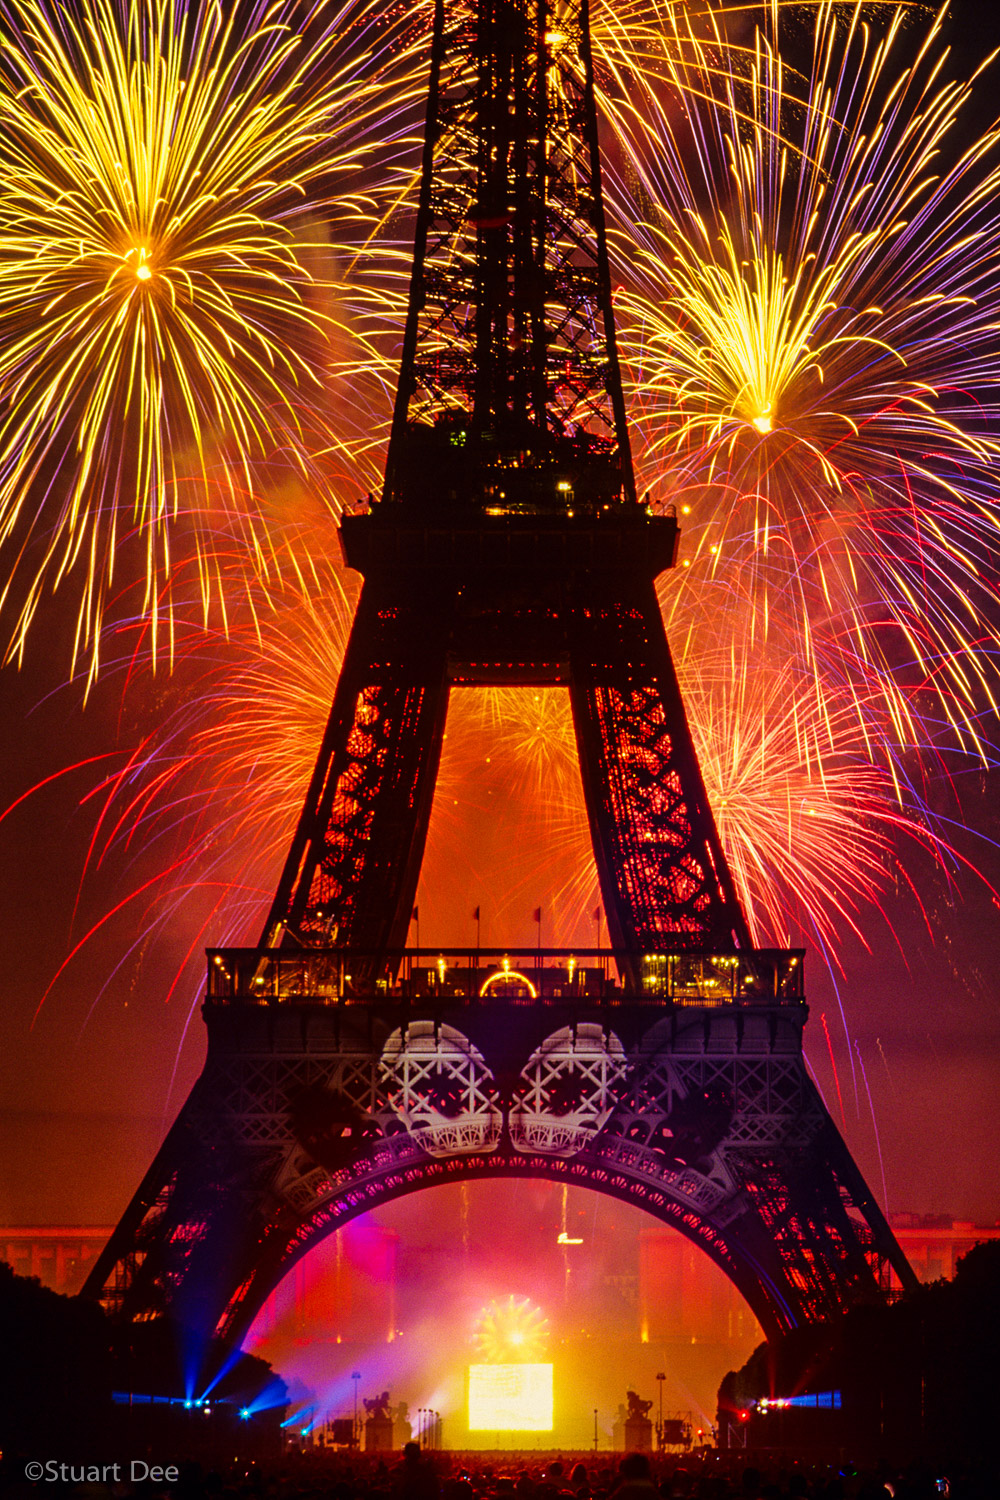  Eiffel Tower with Fireworks on Bastille Day, Paris, France 